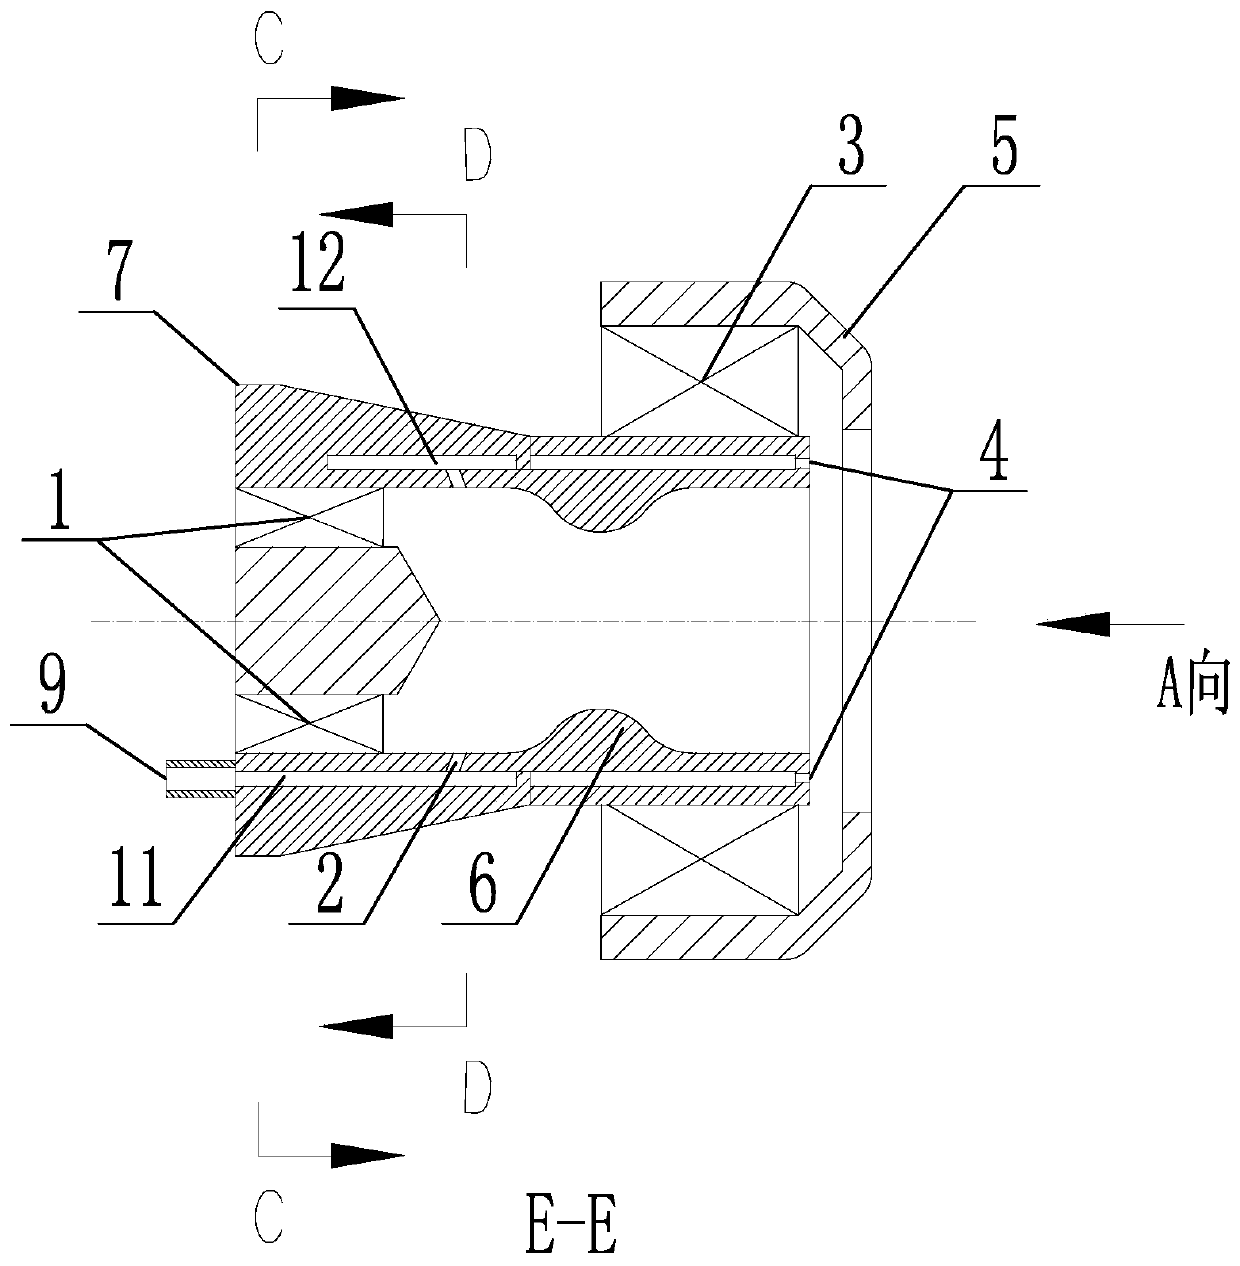 Air atomization nozzle of double-oil-path and double-rotational-flow structure